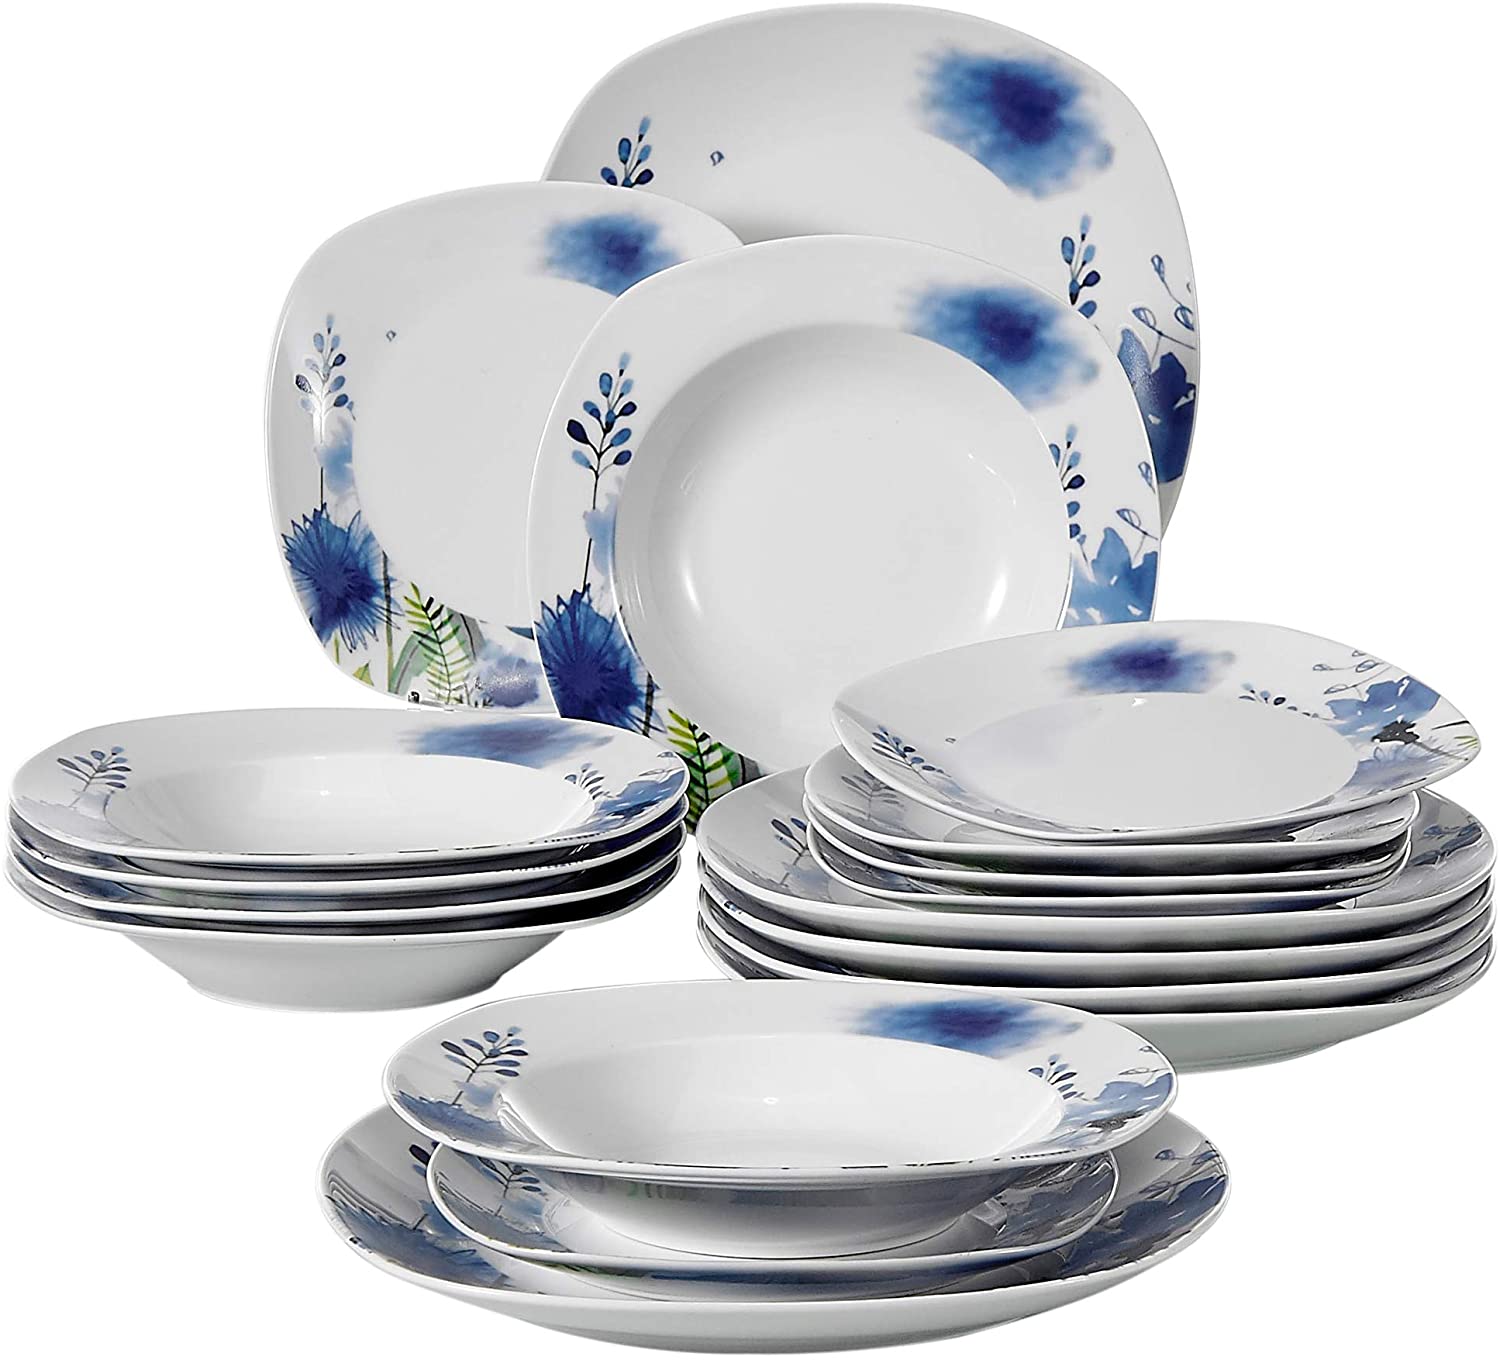 Veweet Laura Porcelain Dinner Set 36 Pieces / 48 Pieces Crockery Set Including Cereal Bowls, Dessert Plates, Dinner Plates and Soup Plates, Tableware Set for 6/12 People